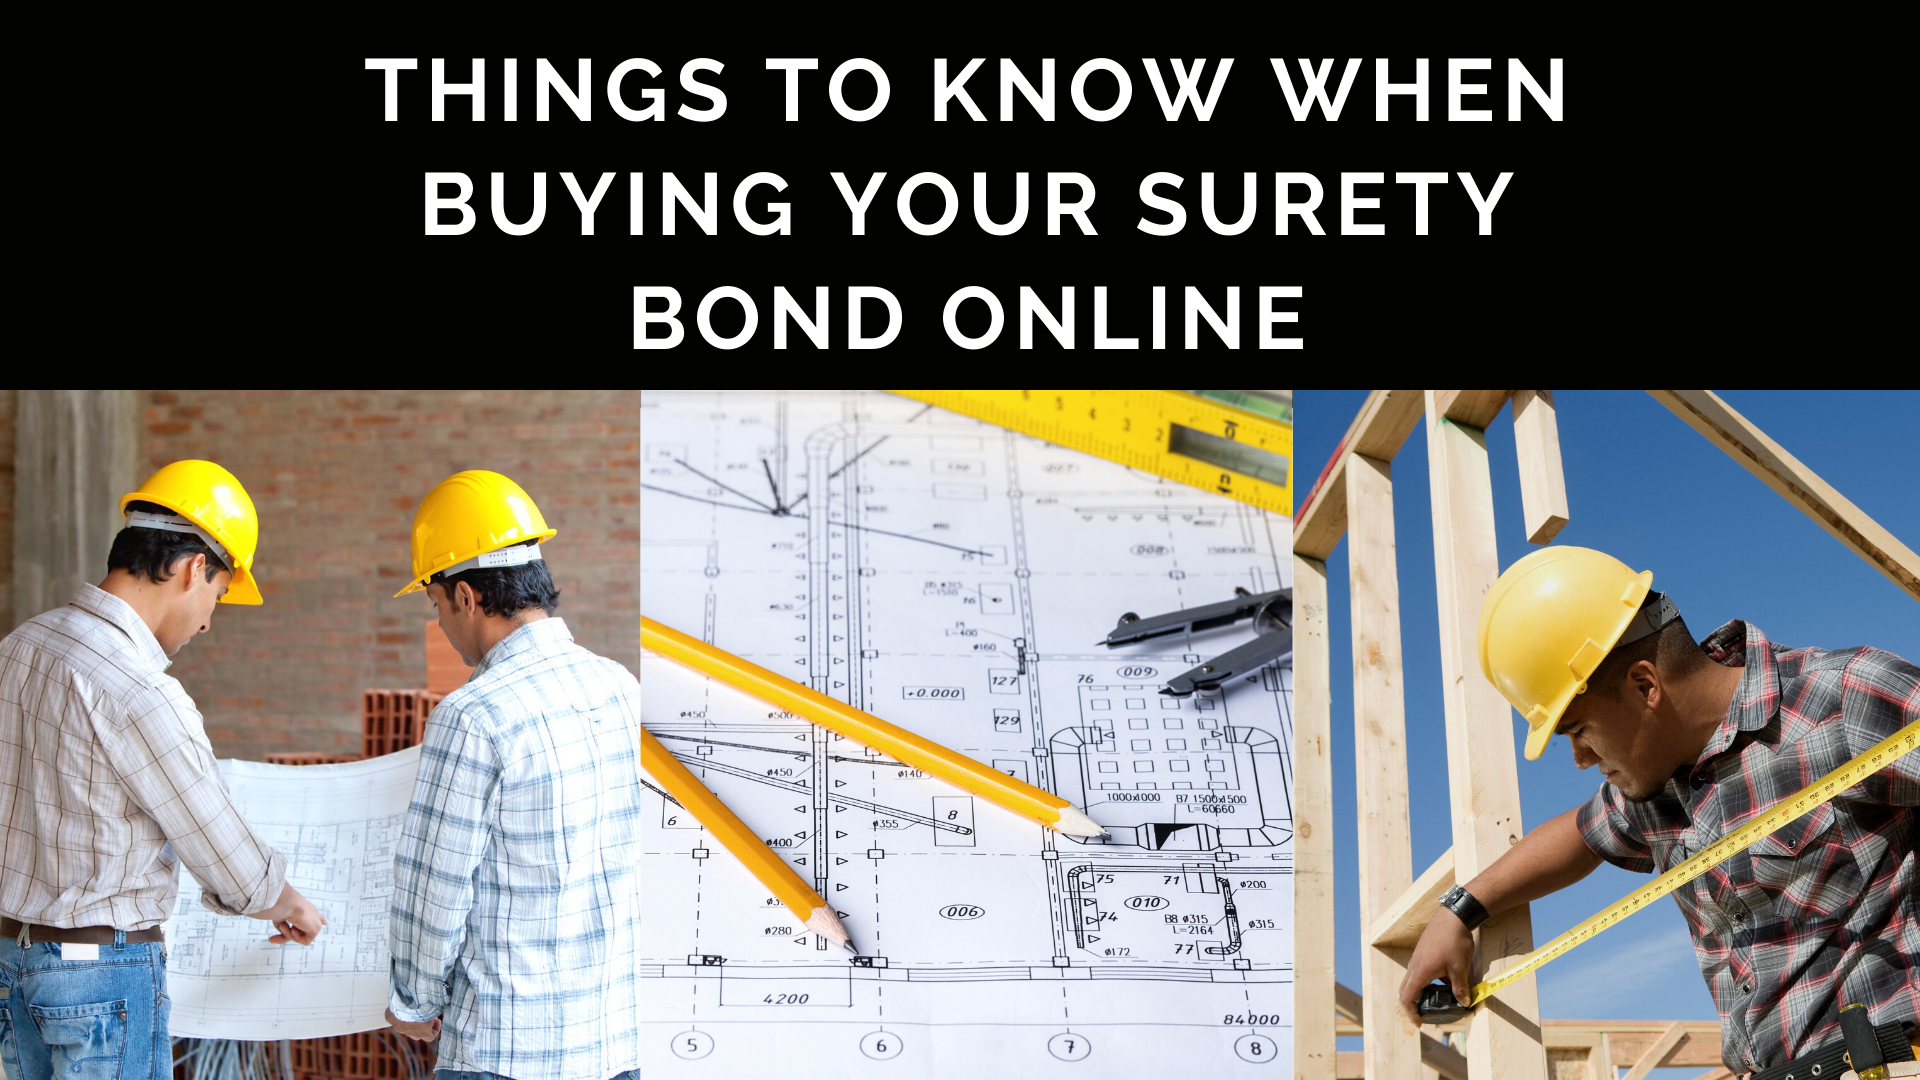 surety bond - what is the best place to get a surety bond - contractors and building plans